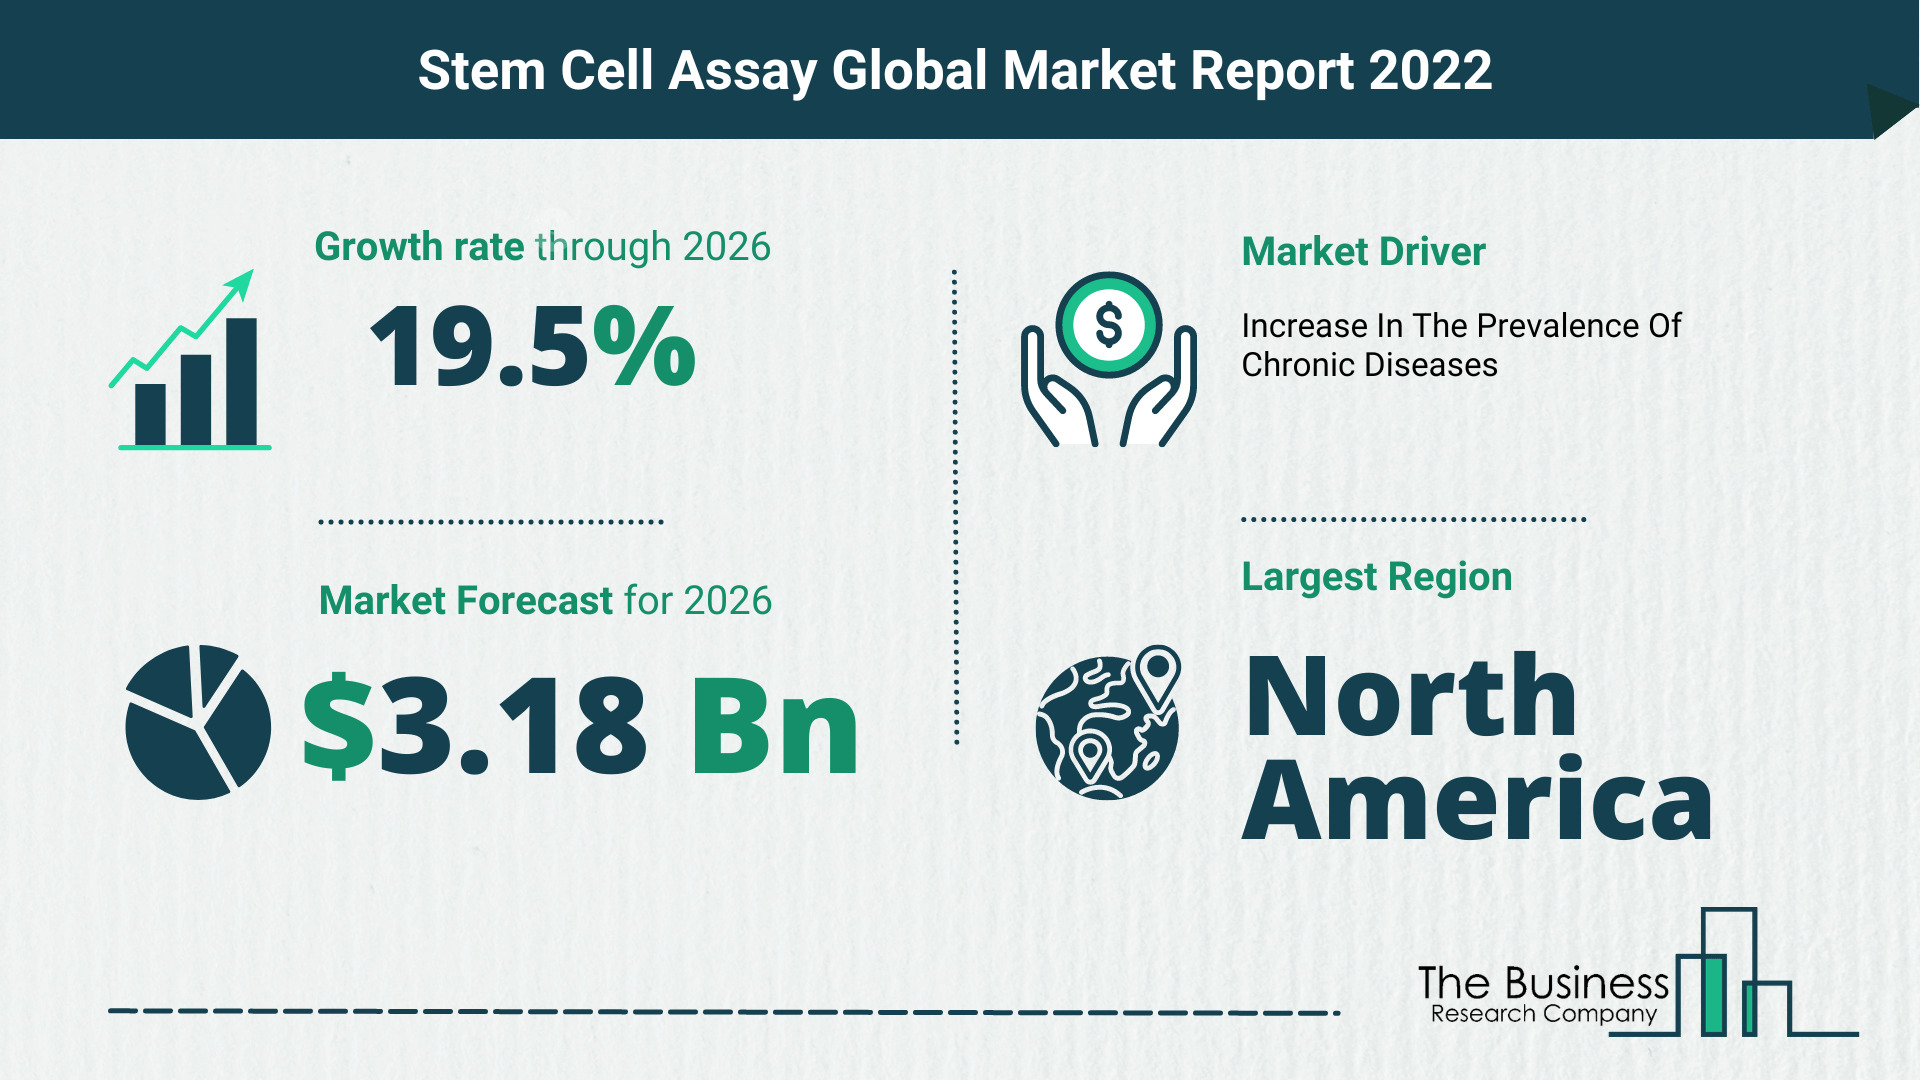 How Will The Stem Cell Assay Market Grow In 2022?